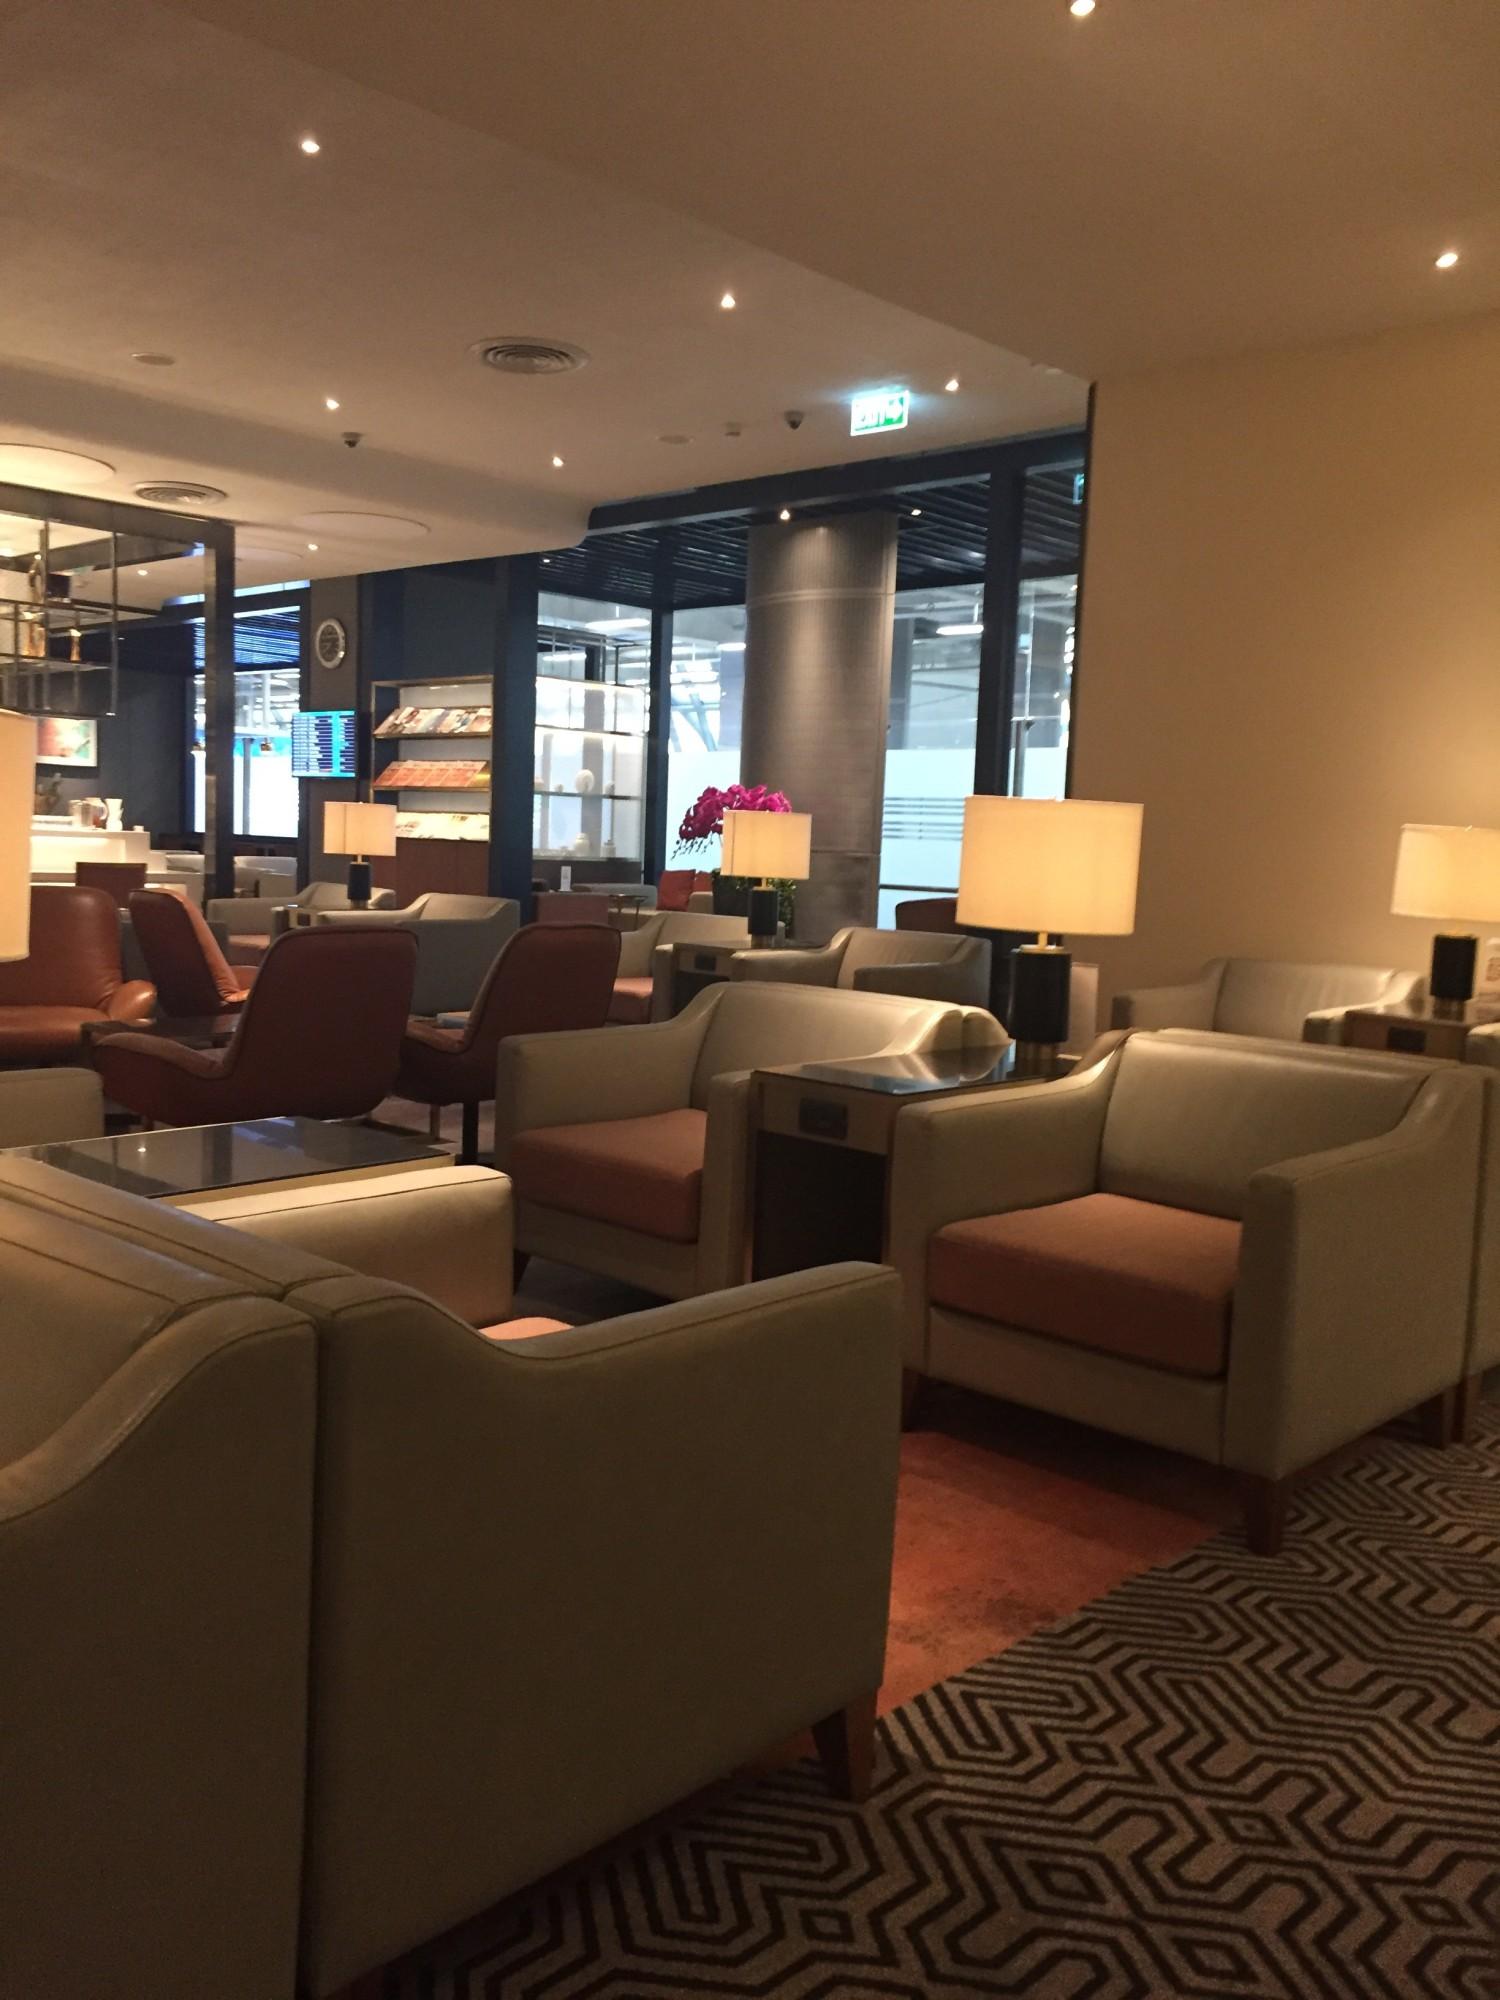 Singapore Airlines SilverKris Business Class Lounge  image 7 of 16